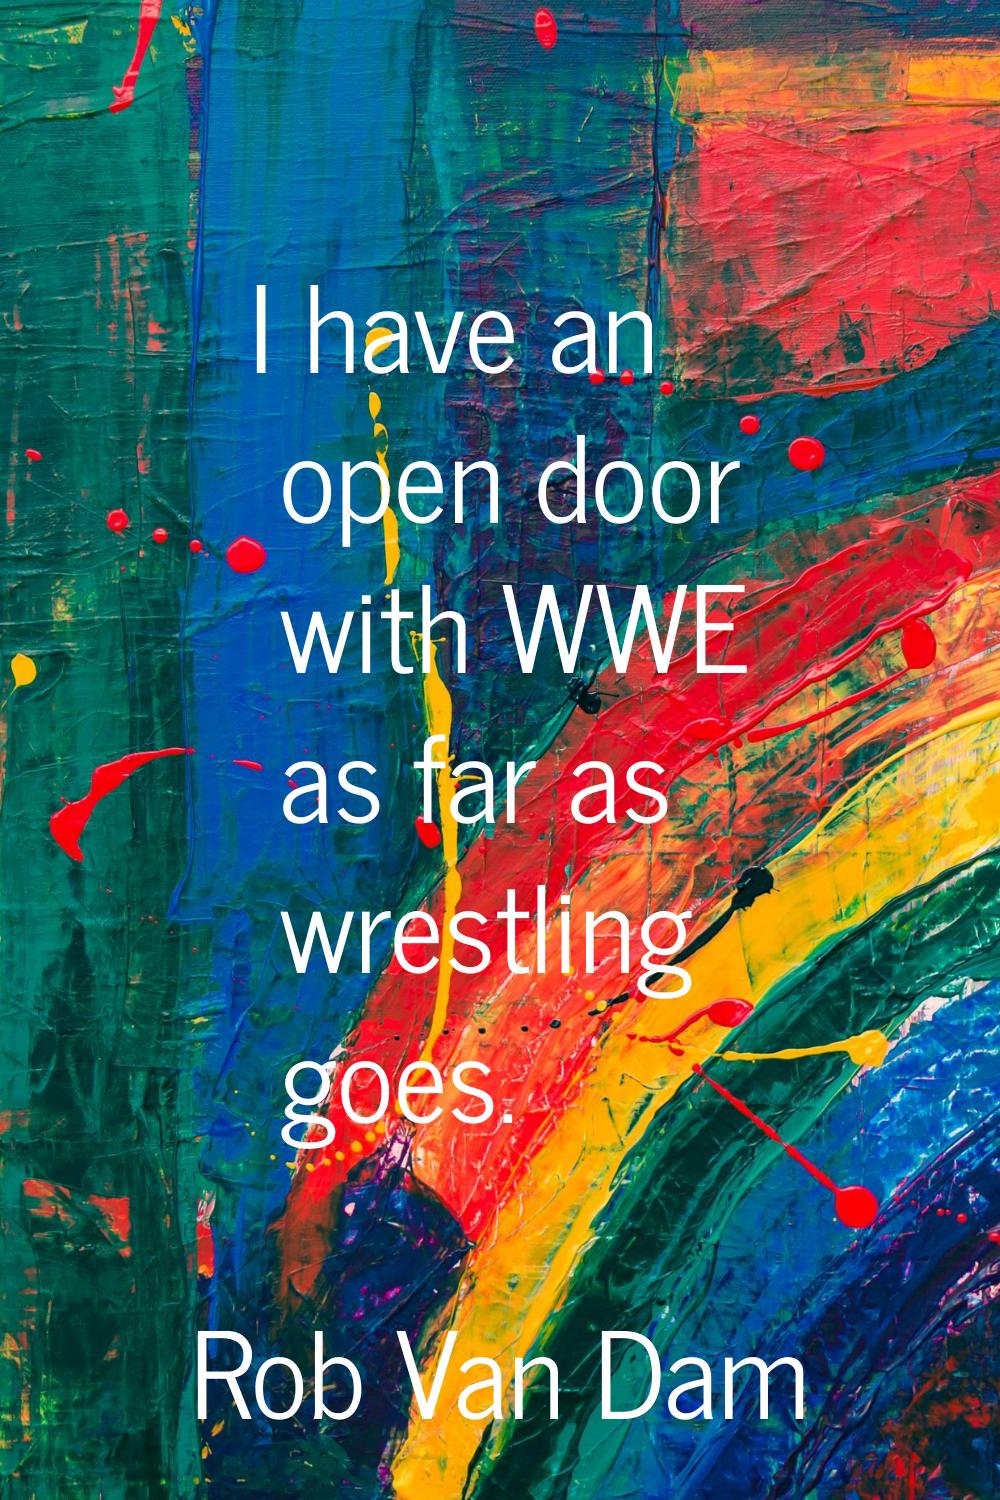 I have an open door with WWE as far as wrestling goes.